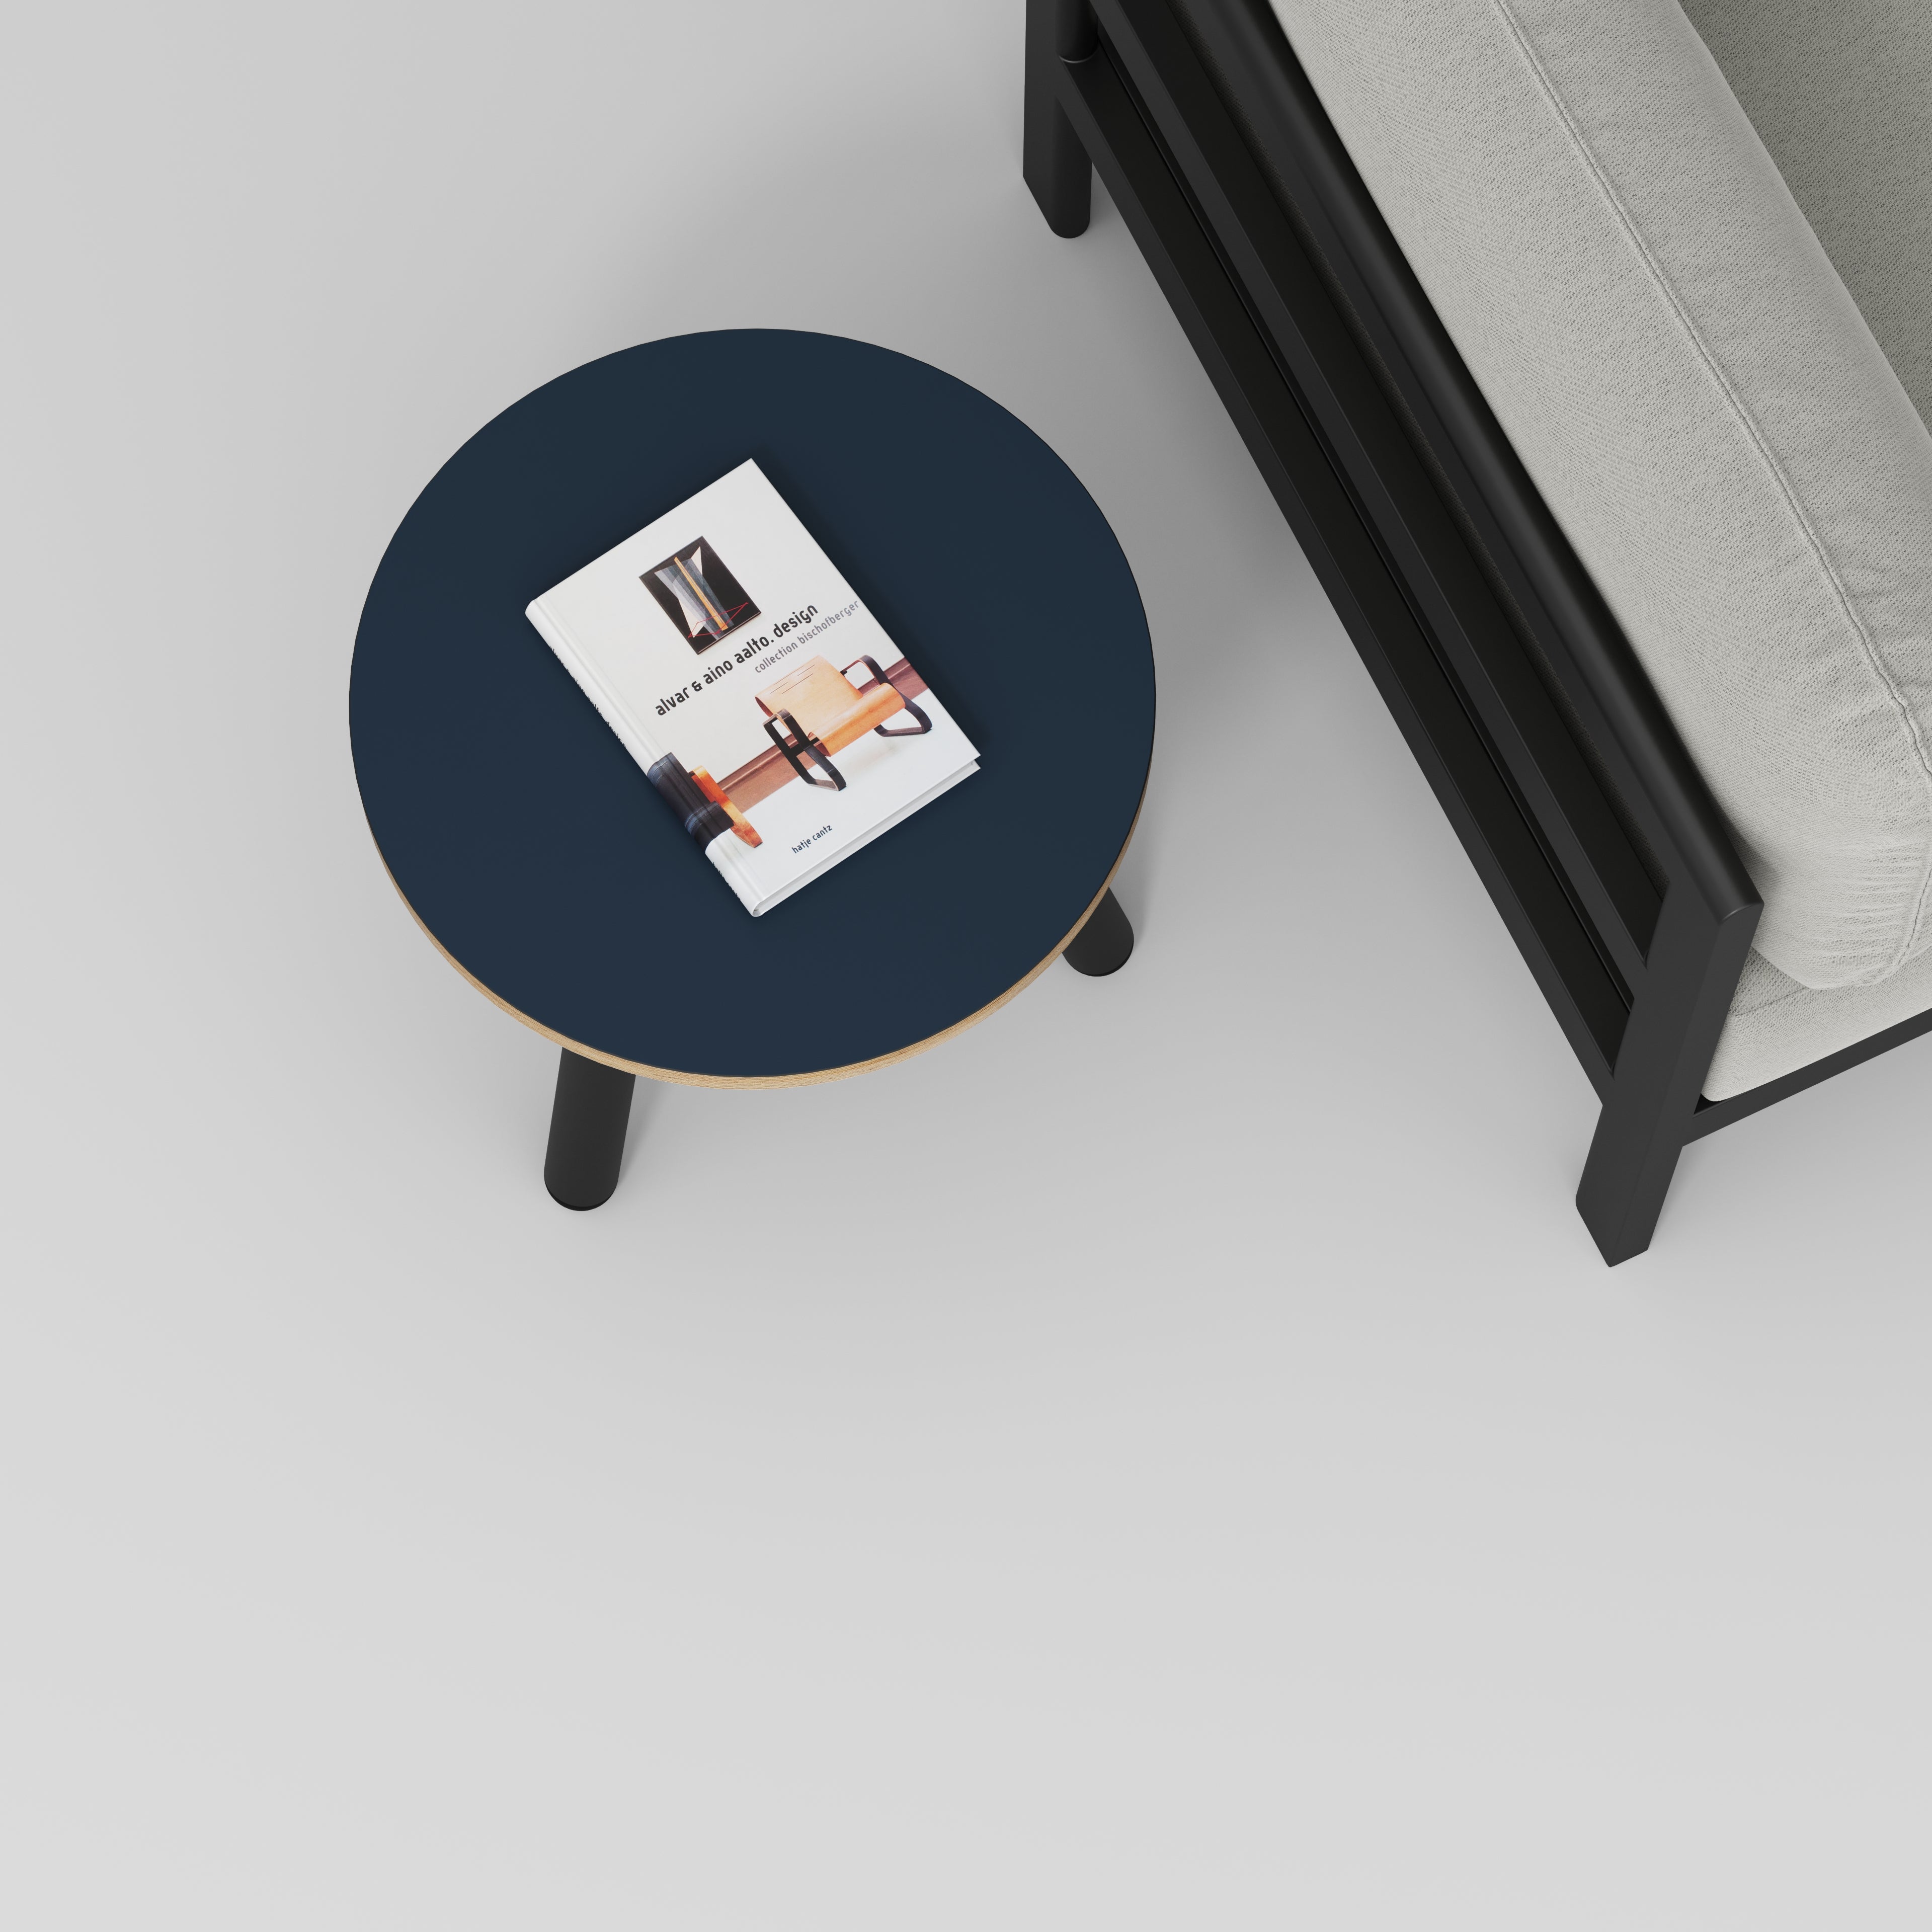 Round Side Table with Black Round Single Pin Legs - Formica Night Sea Blue - 500(w) x 500(d) x 425(h)